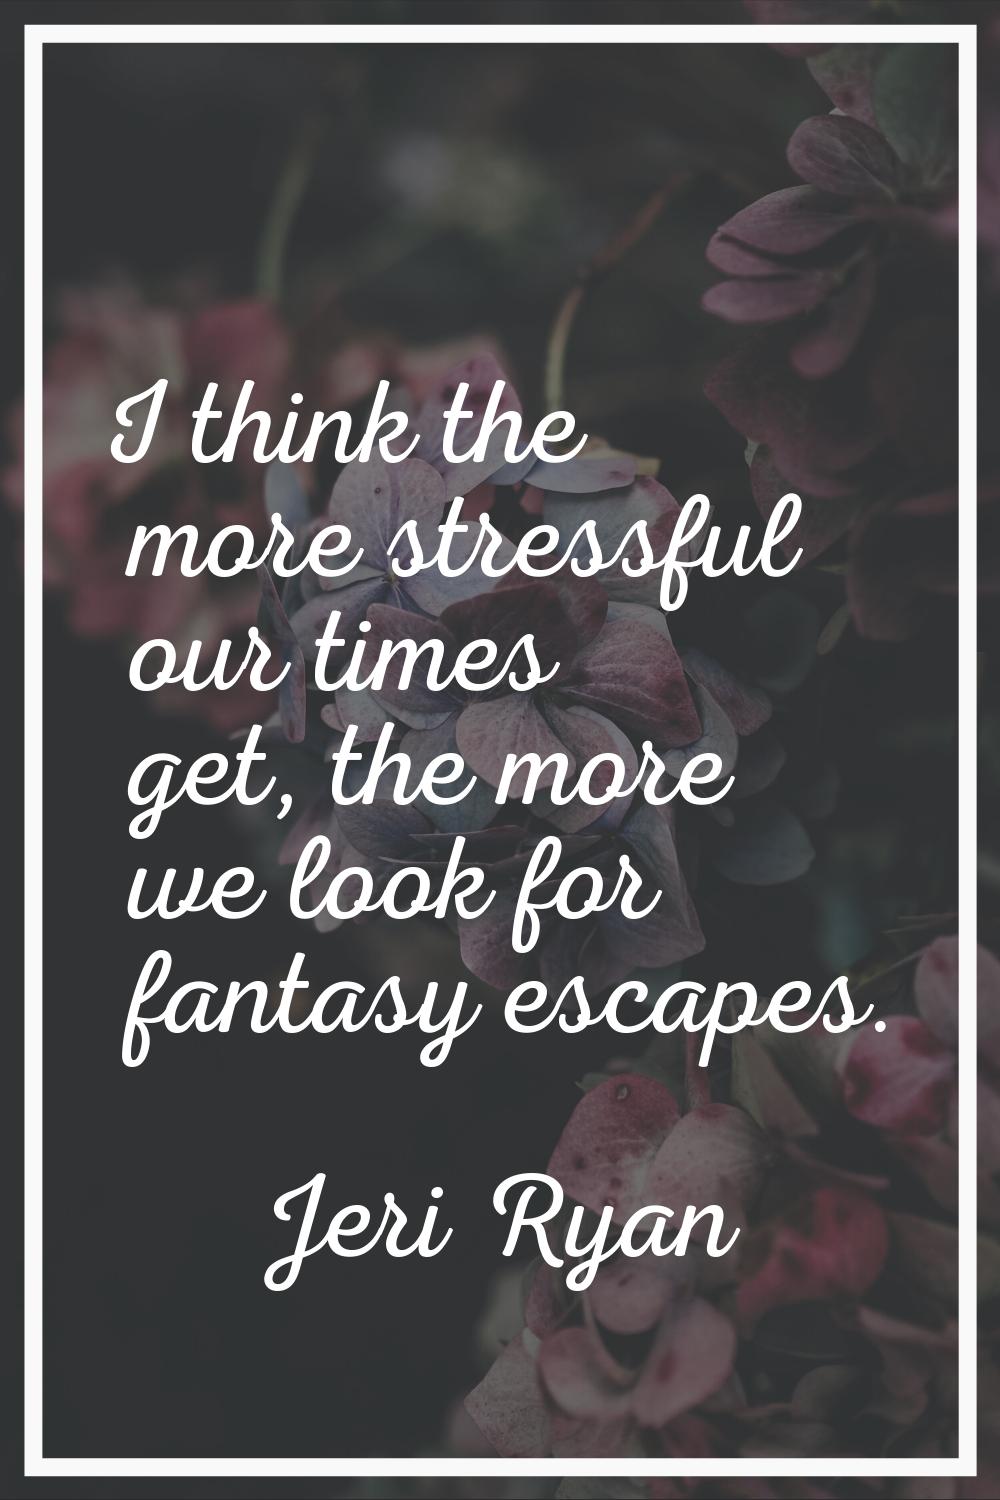 I think the more stressful our times get, the more we look for fantasy escapes.